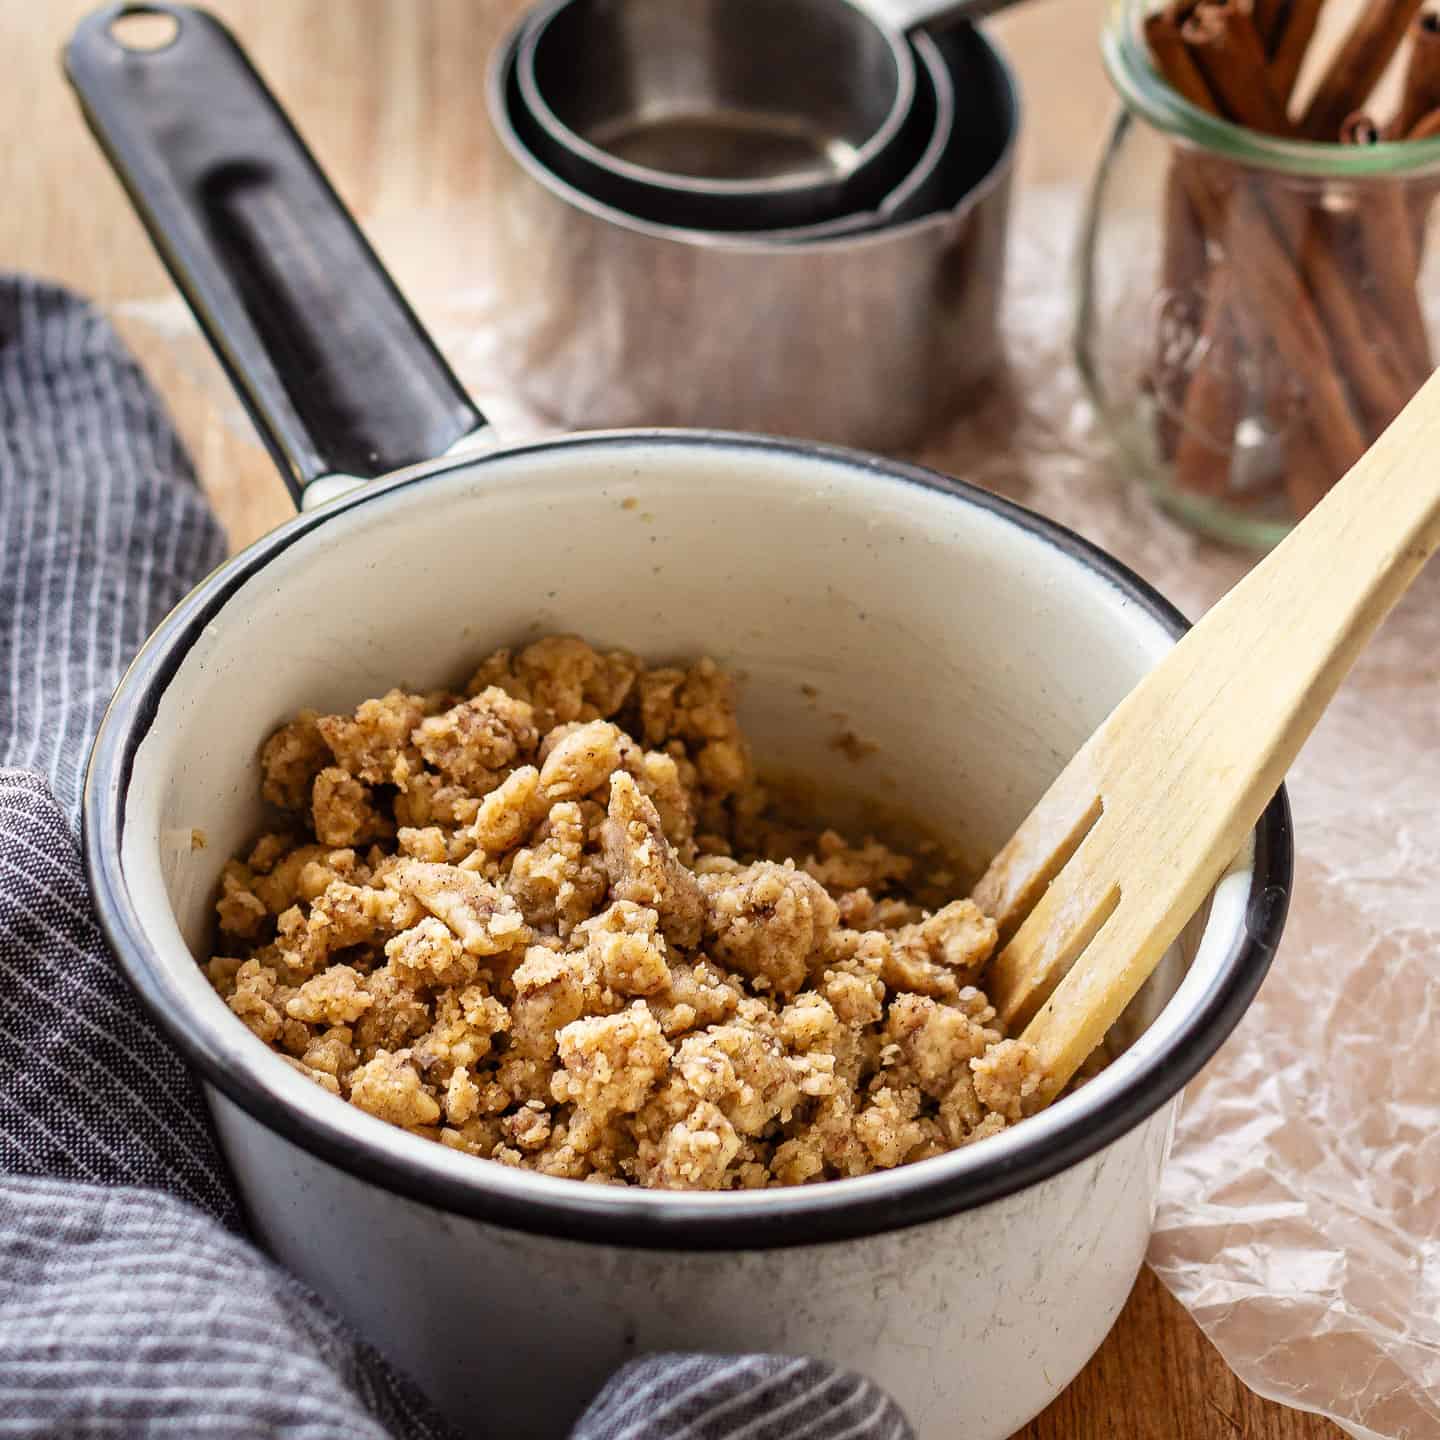 Easy Streusel Topping Recipe